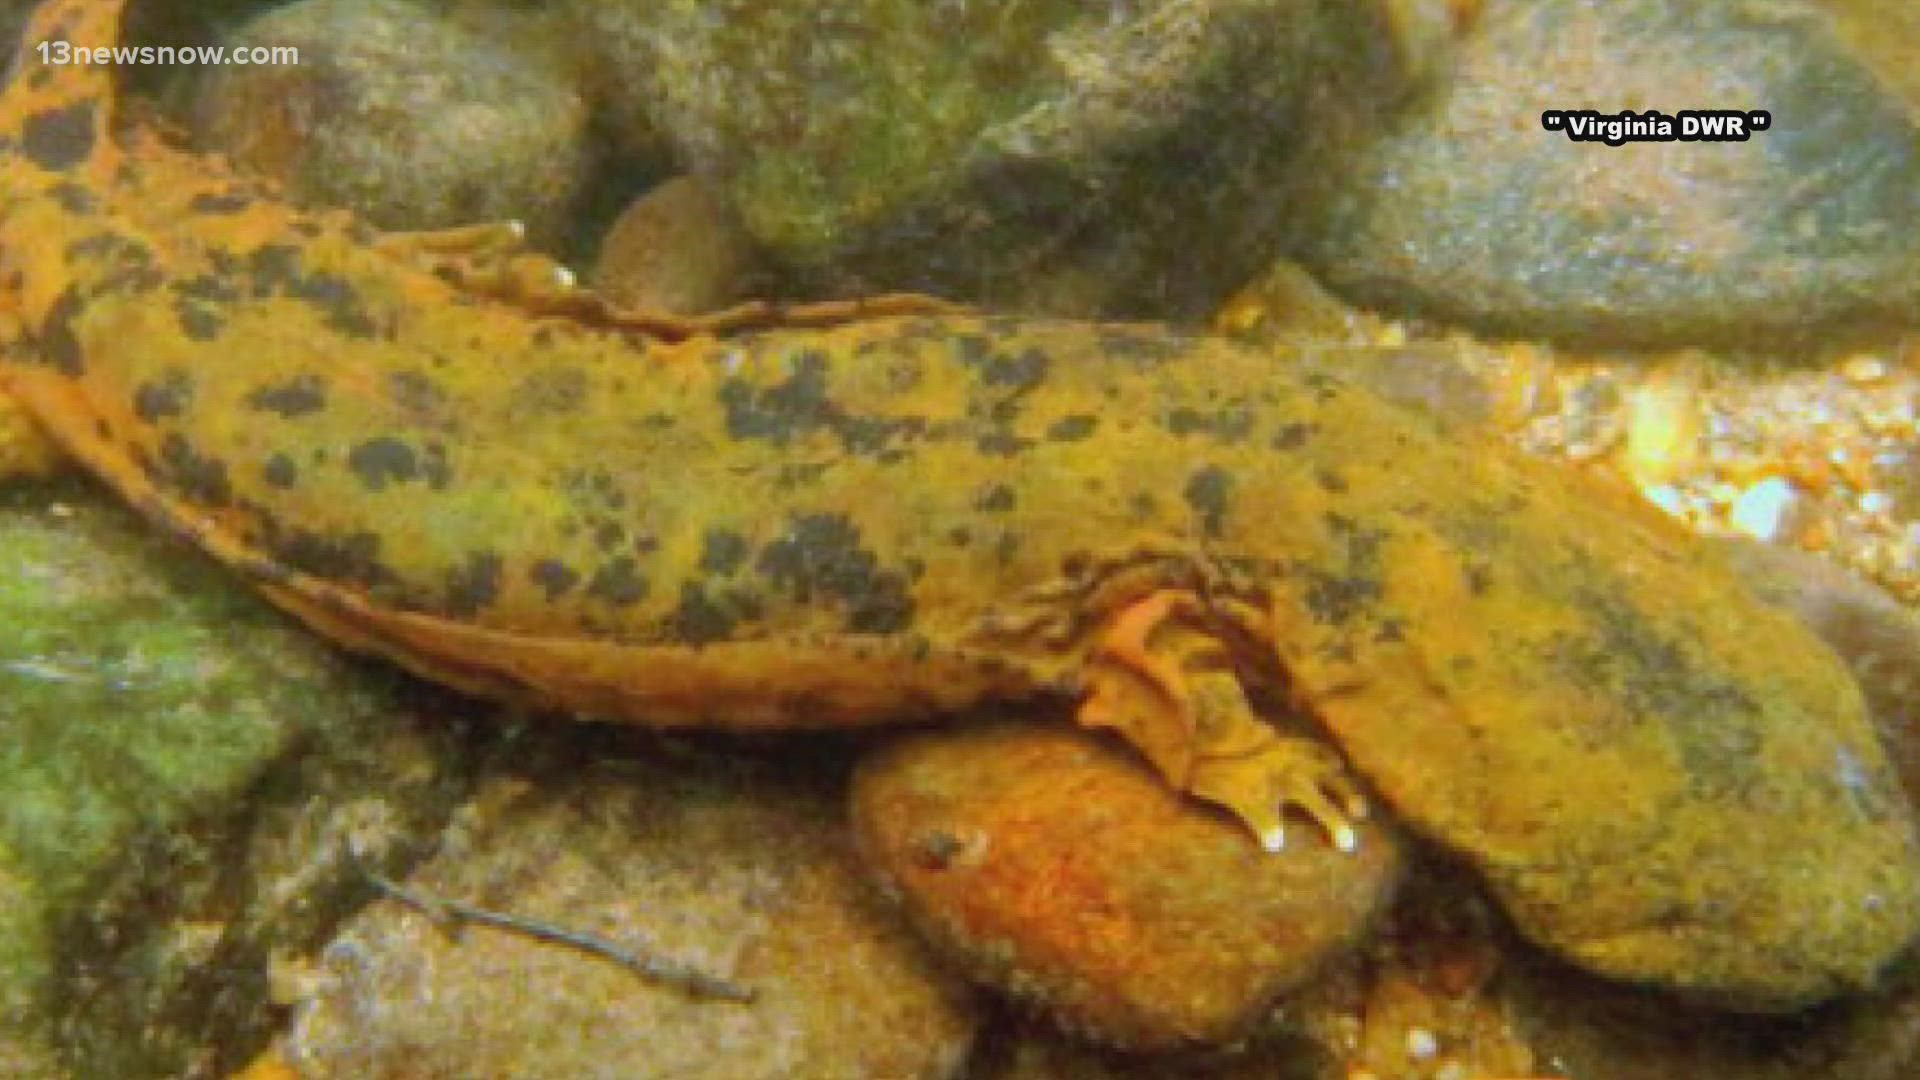 The Eastern Hellbender, known as the "Snot Otter," has strong roots in the Commonwealth. The DWR is holding an art competition to honor that.